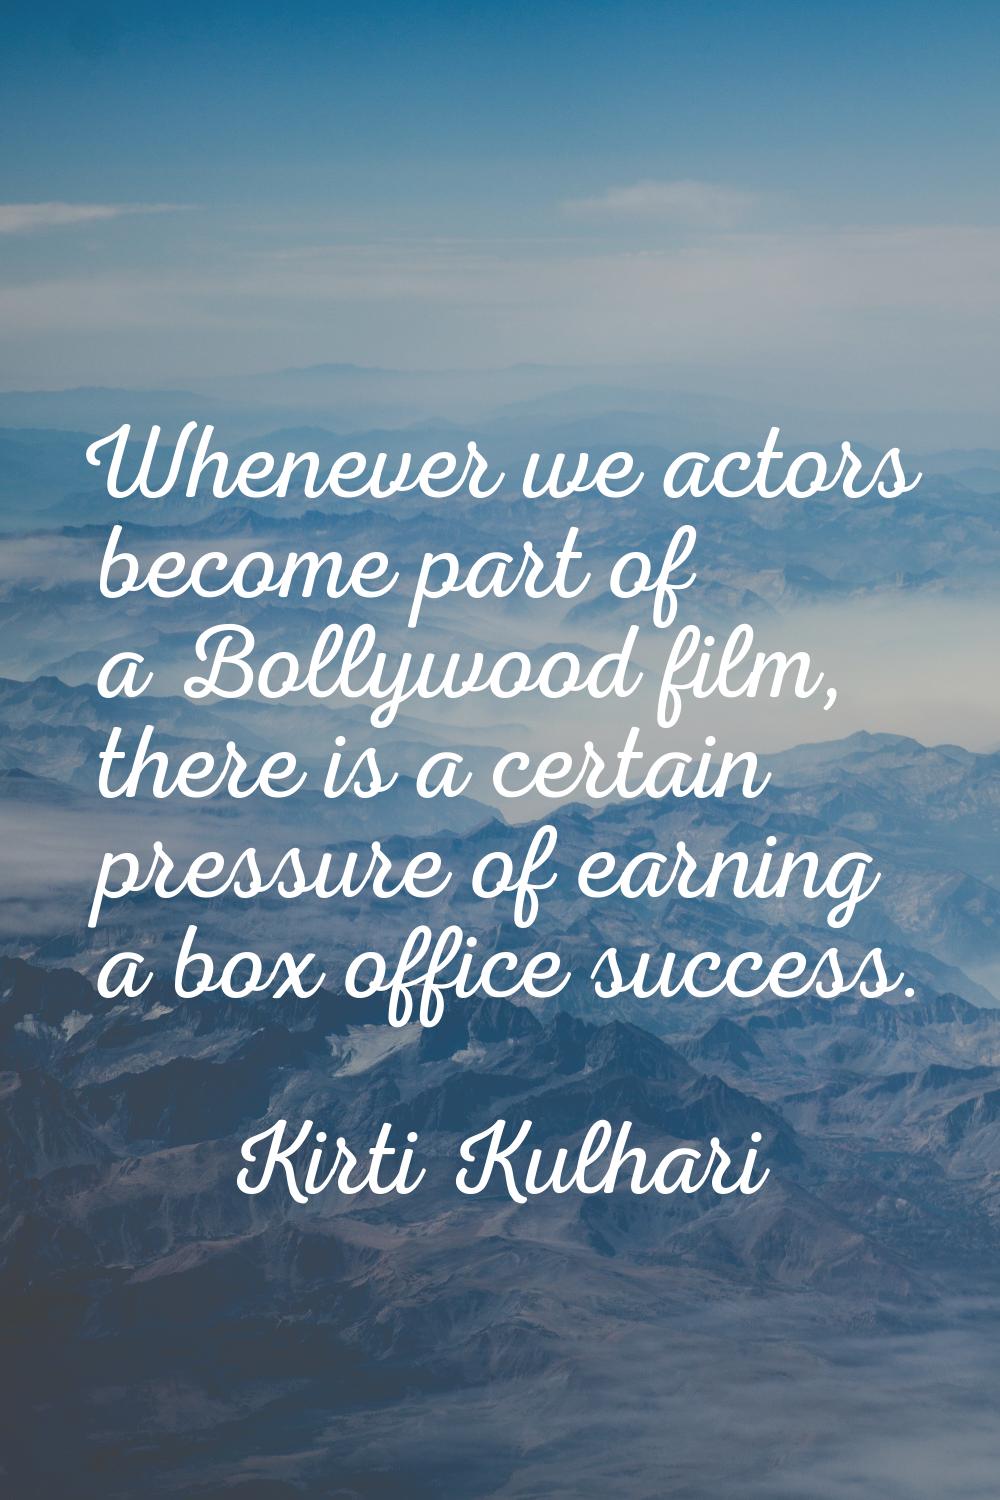 Whenever we actors become part of a Bollywood film, there is a certain pressure of earning a box of